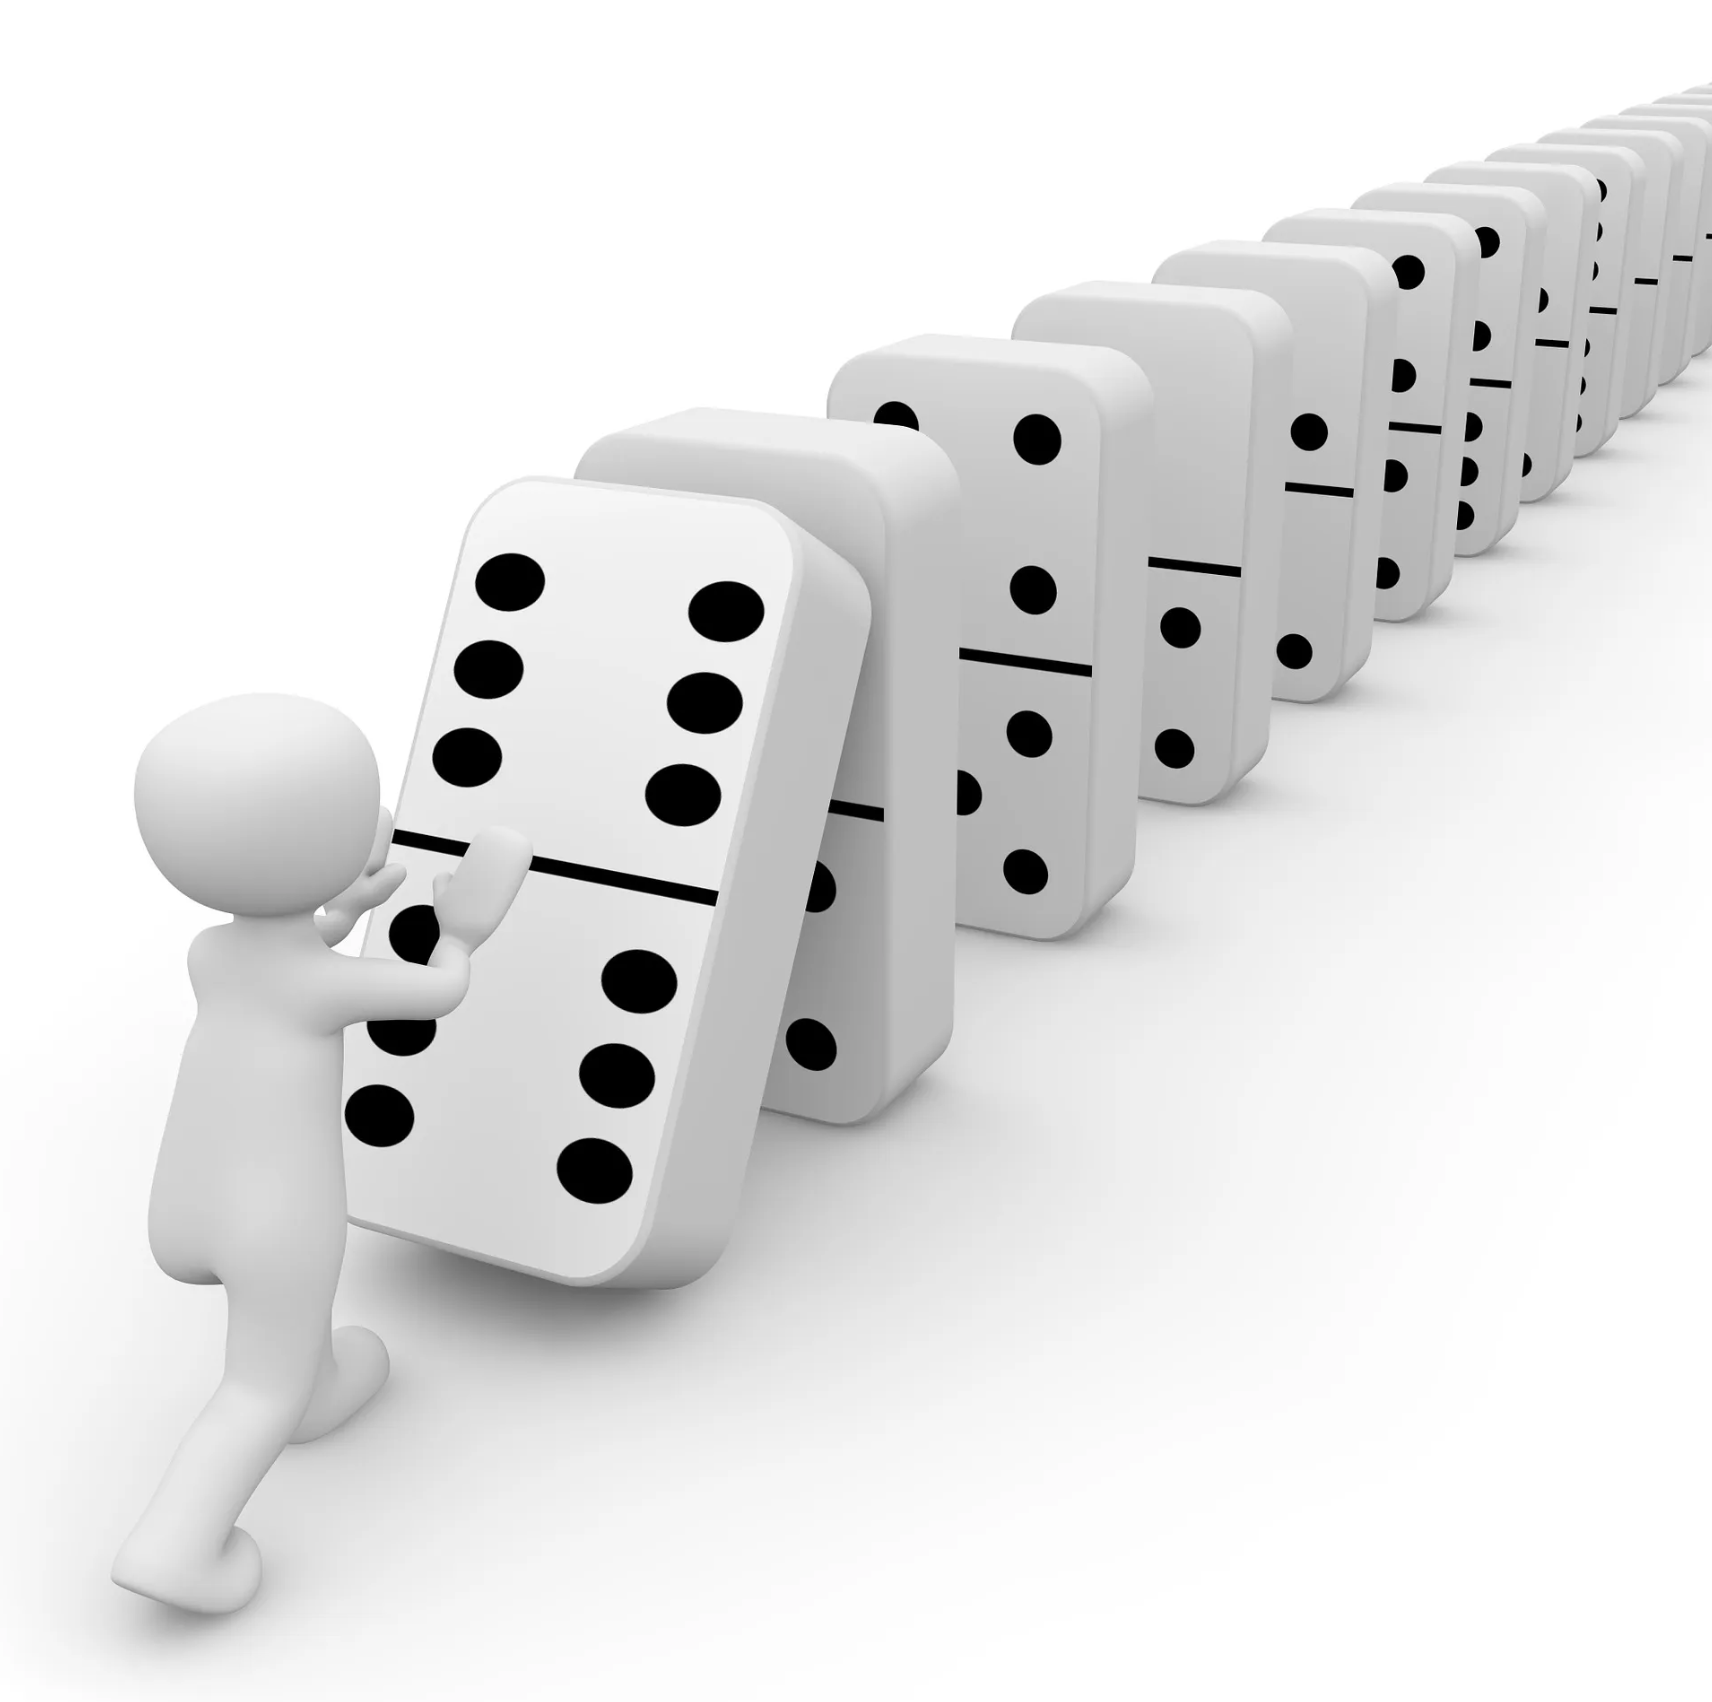 The Domino Effect of Bad Reviews: